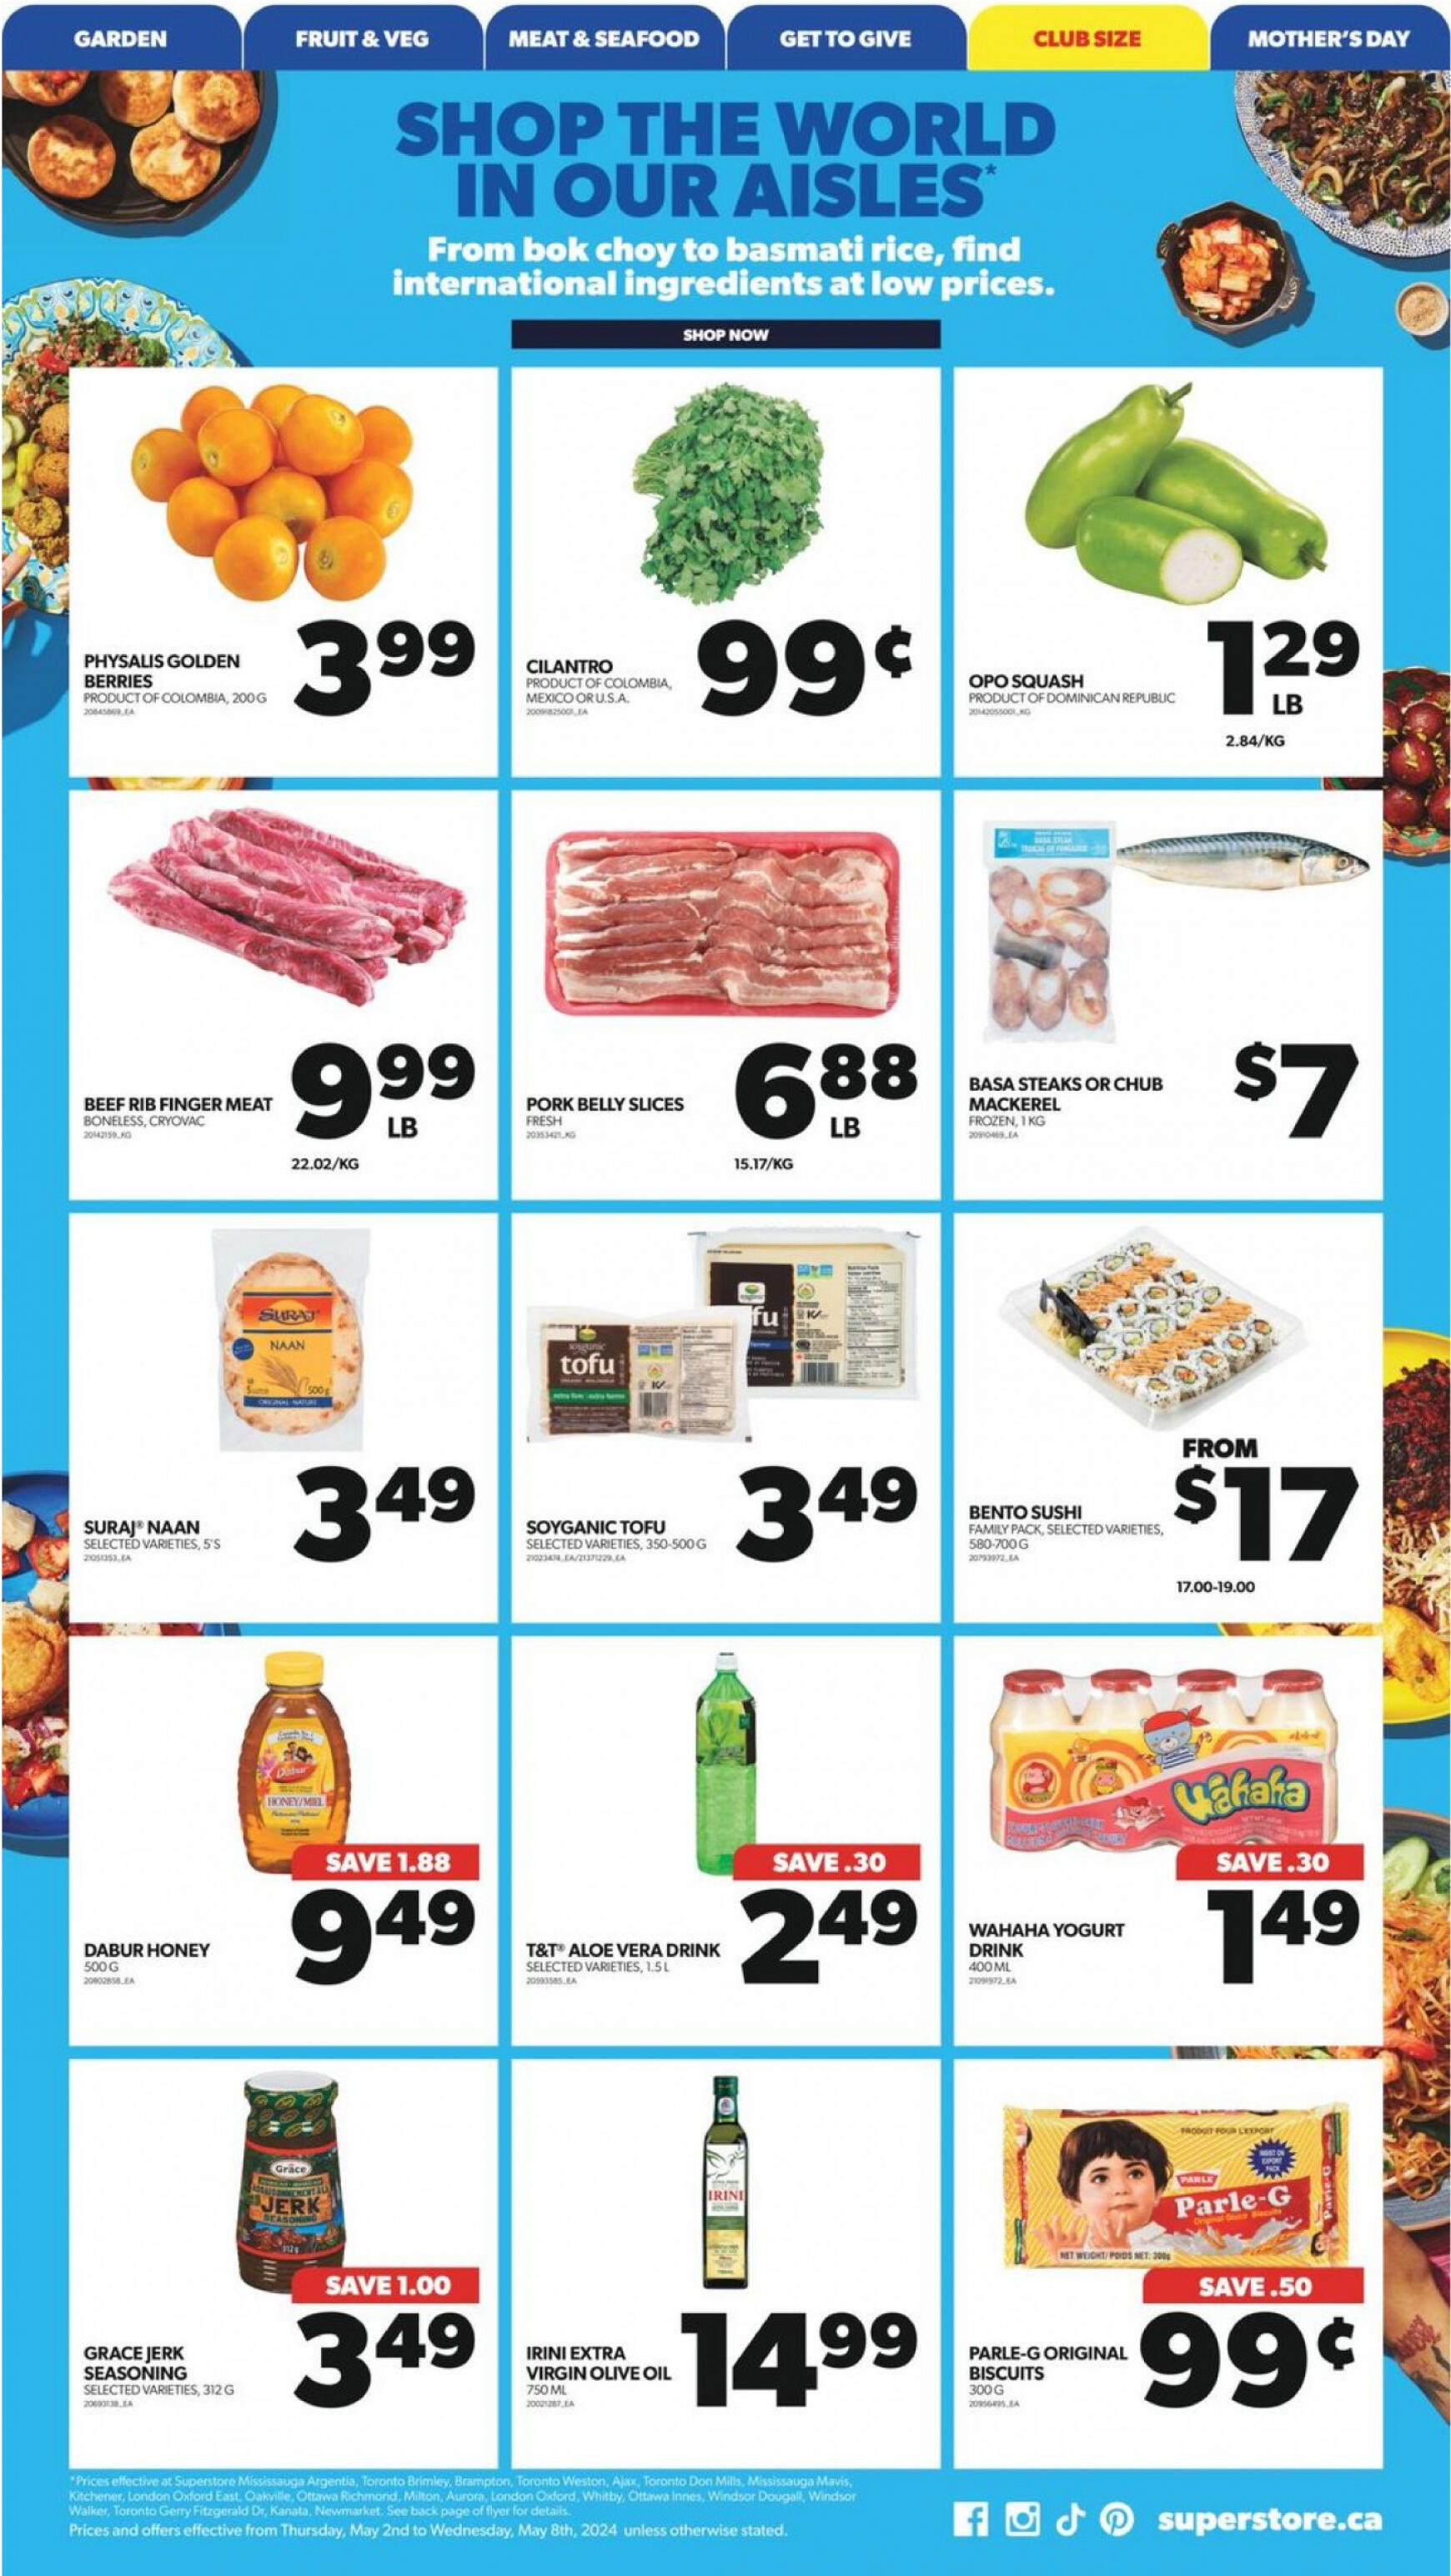 real-canadian-superstore - Real Canadian Superstore flyer current 02.05. - 08.05. - page: 39